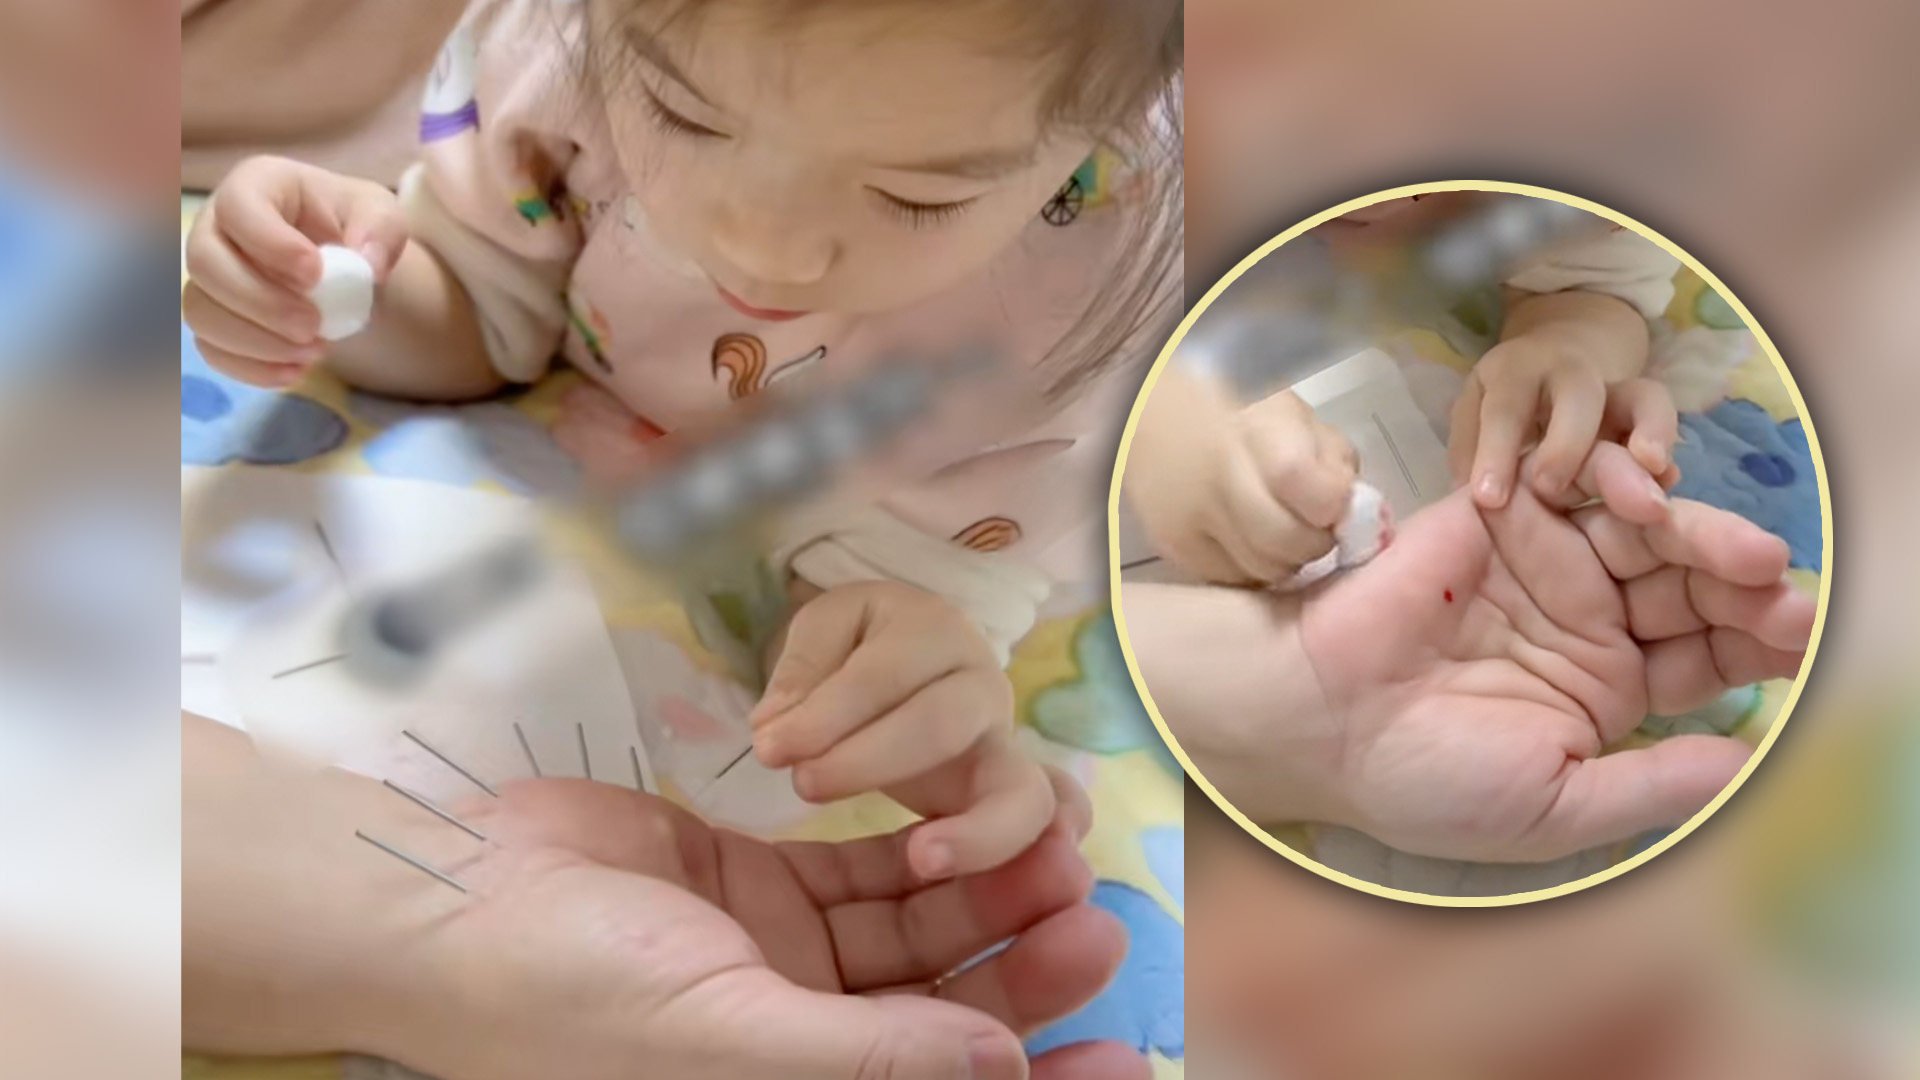 A five-year-old girl in China has stunned mainland social media by learning to practice Traditional Chinese Medicine acupuncture, and more, from her grandmother. Photo: SCMP composite/Douyin